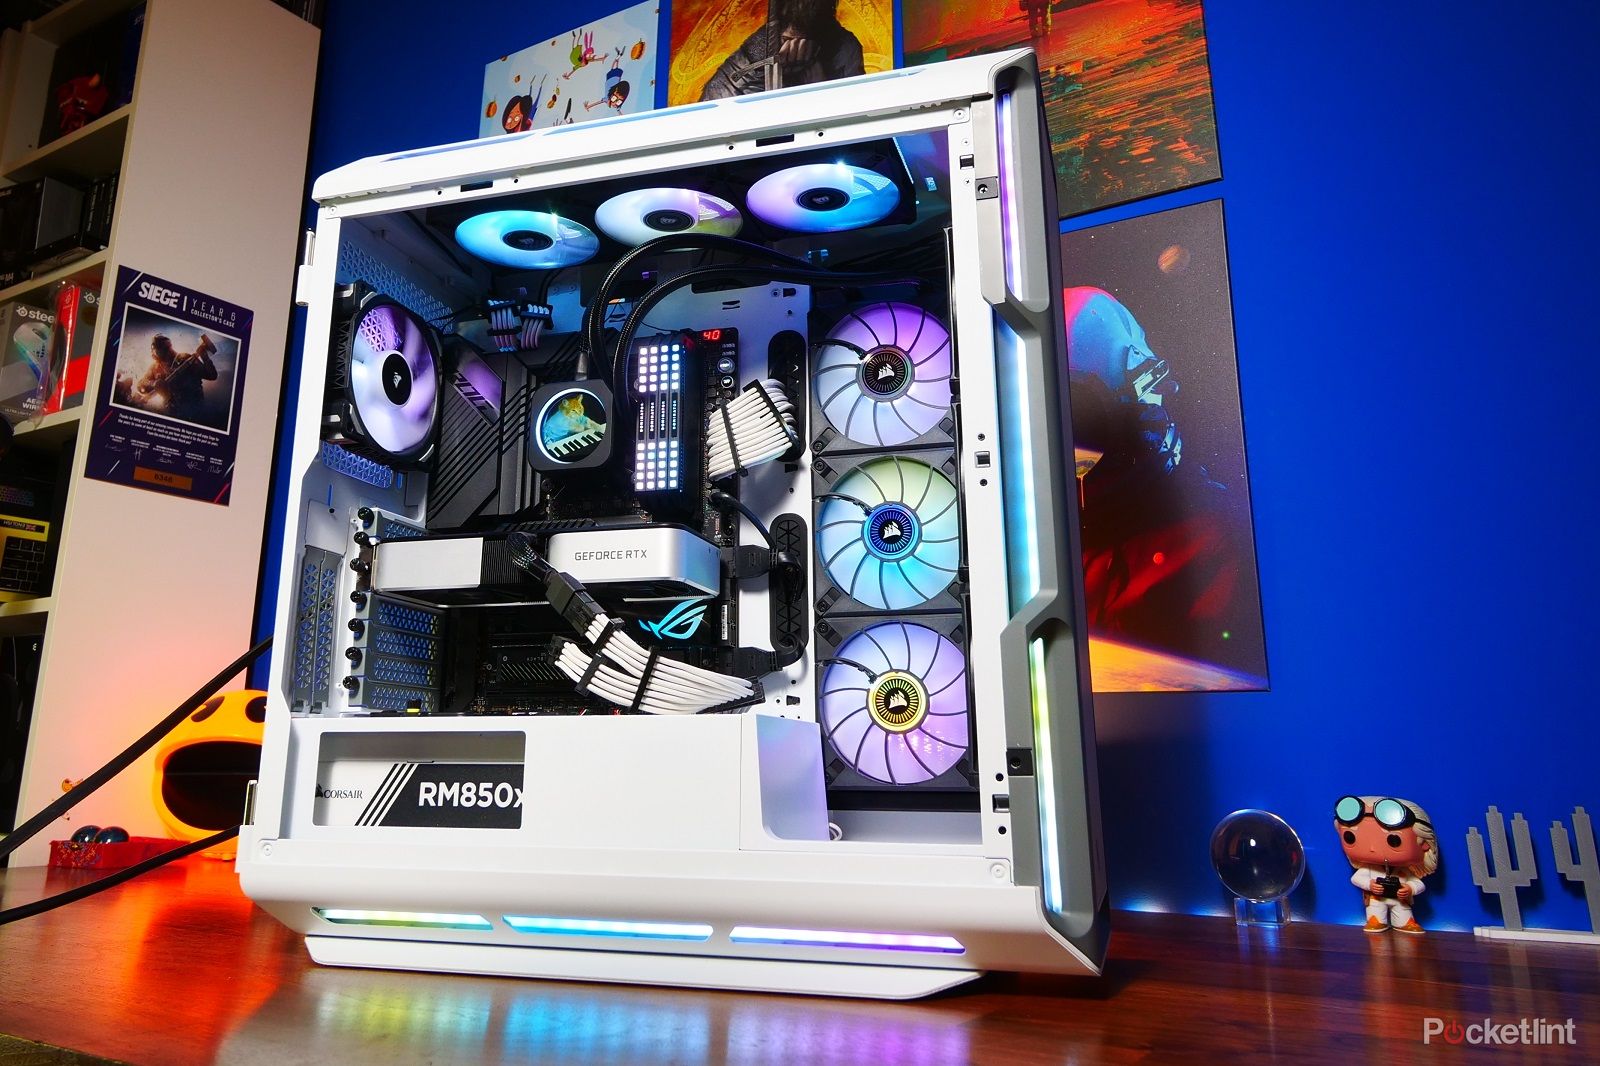 Everything You Need to Know Before Buying a Gaming PC